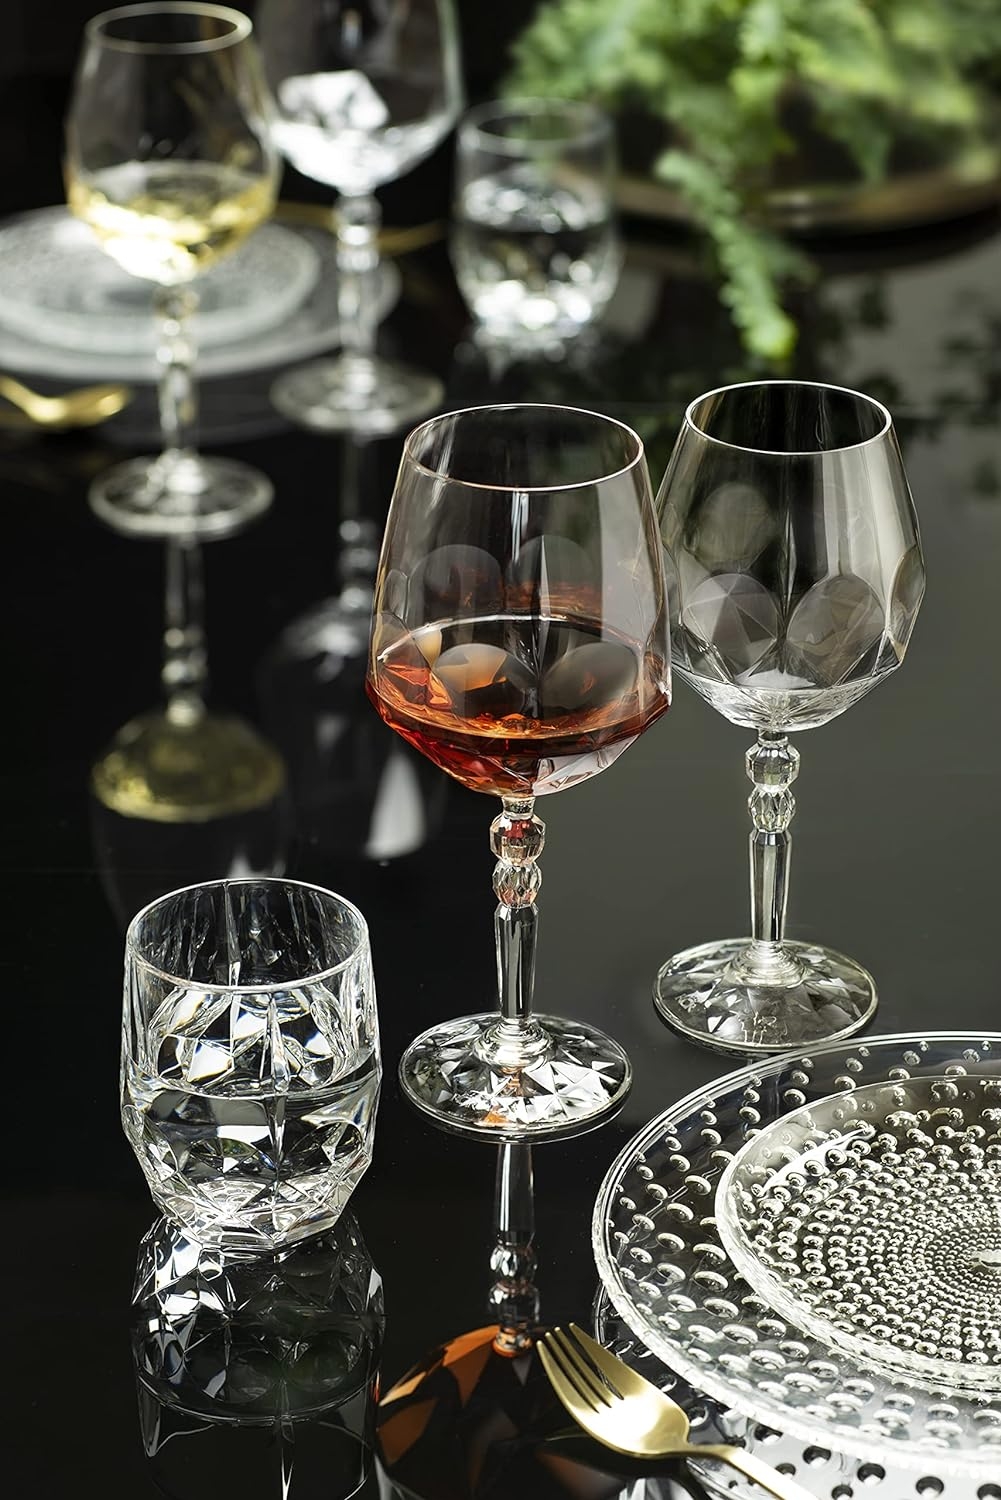 Beautifully designed goblets, crystal cocktail glasses